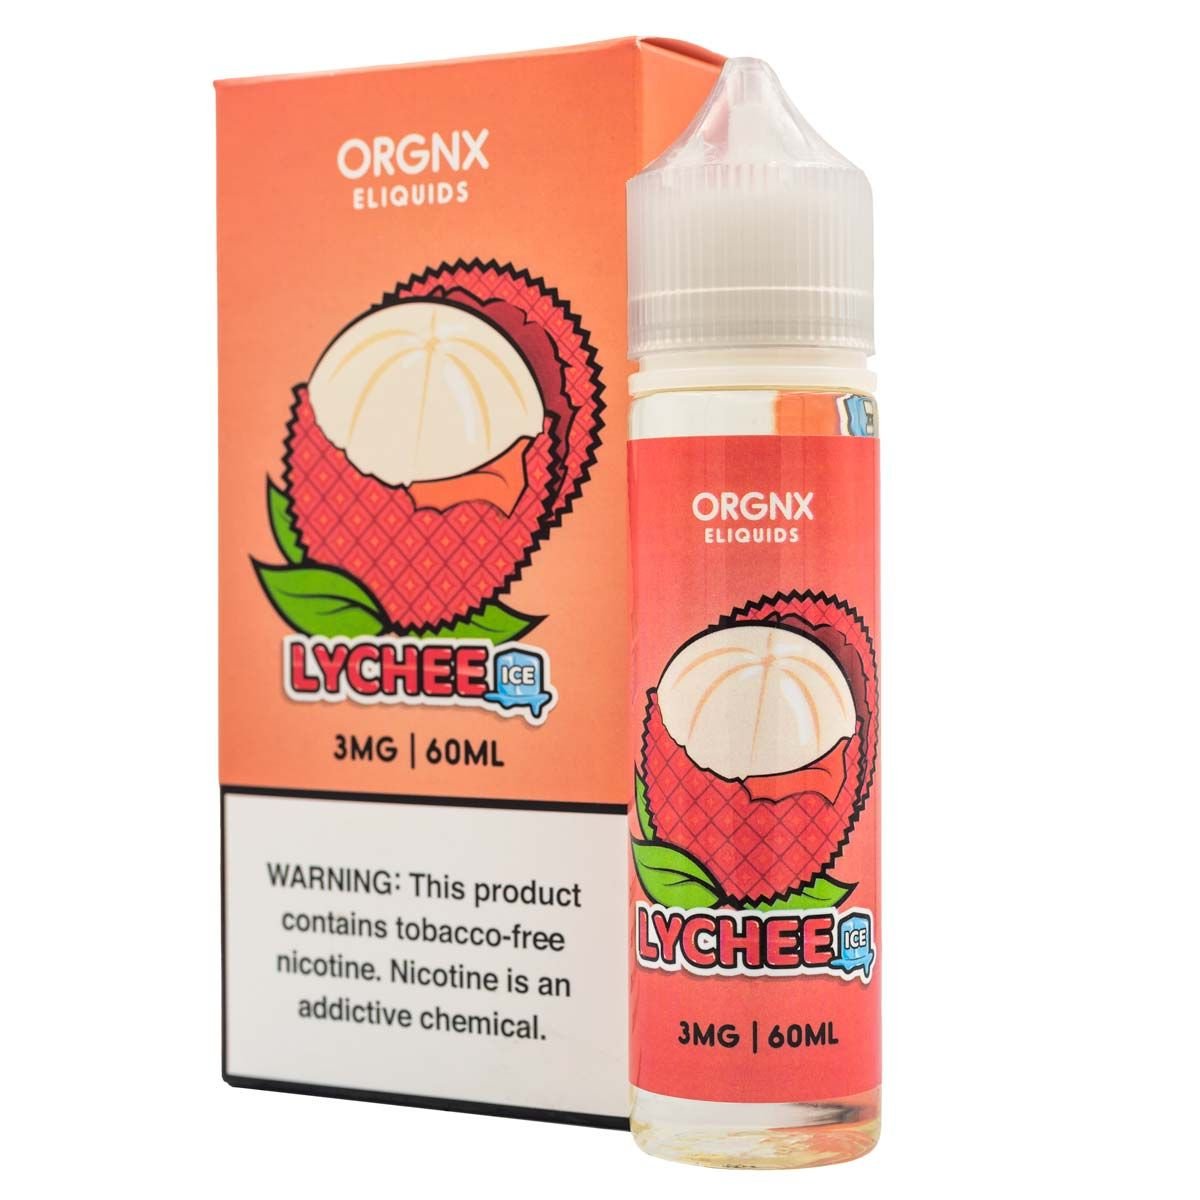 ORGNX ELIQUID - LYCHEE ICED - 60ML - EJUICEOVERSTOCK.COM